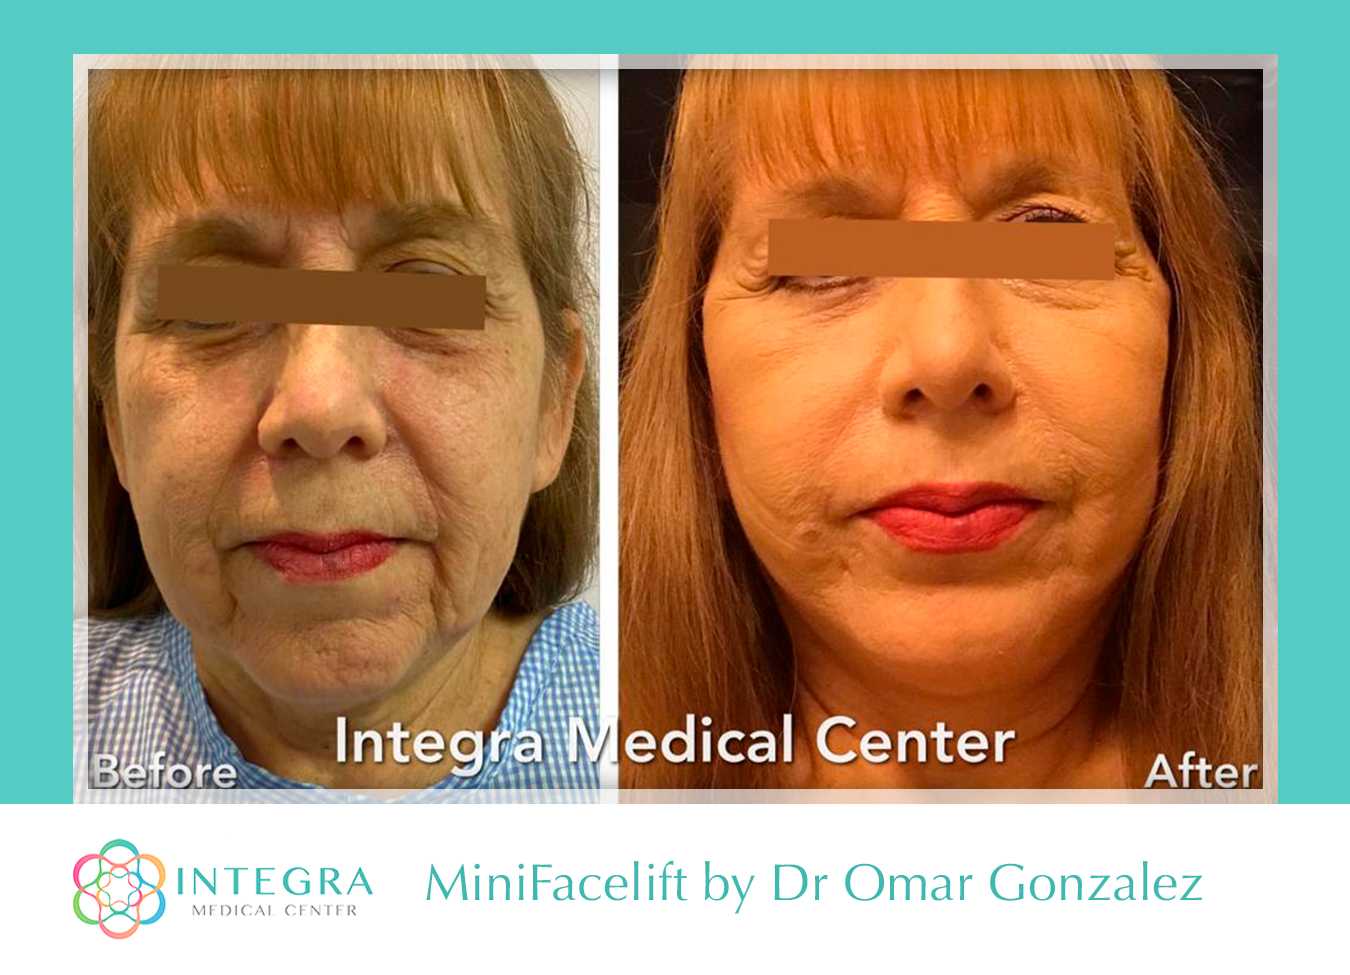 Before After - MiniFaceLift procedure at Integra Medical Center